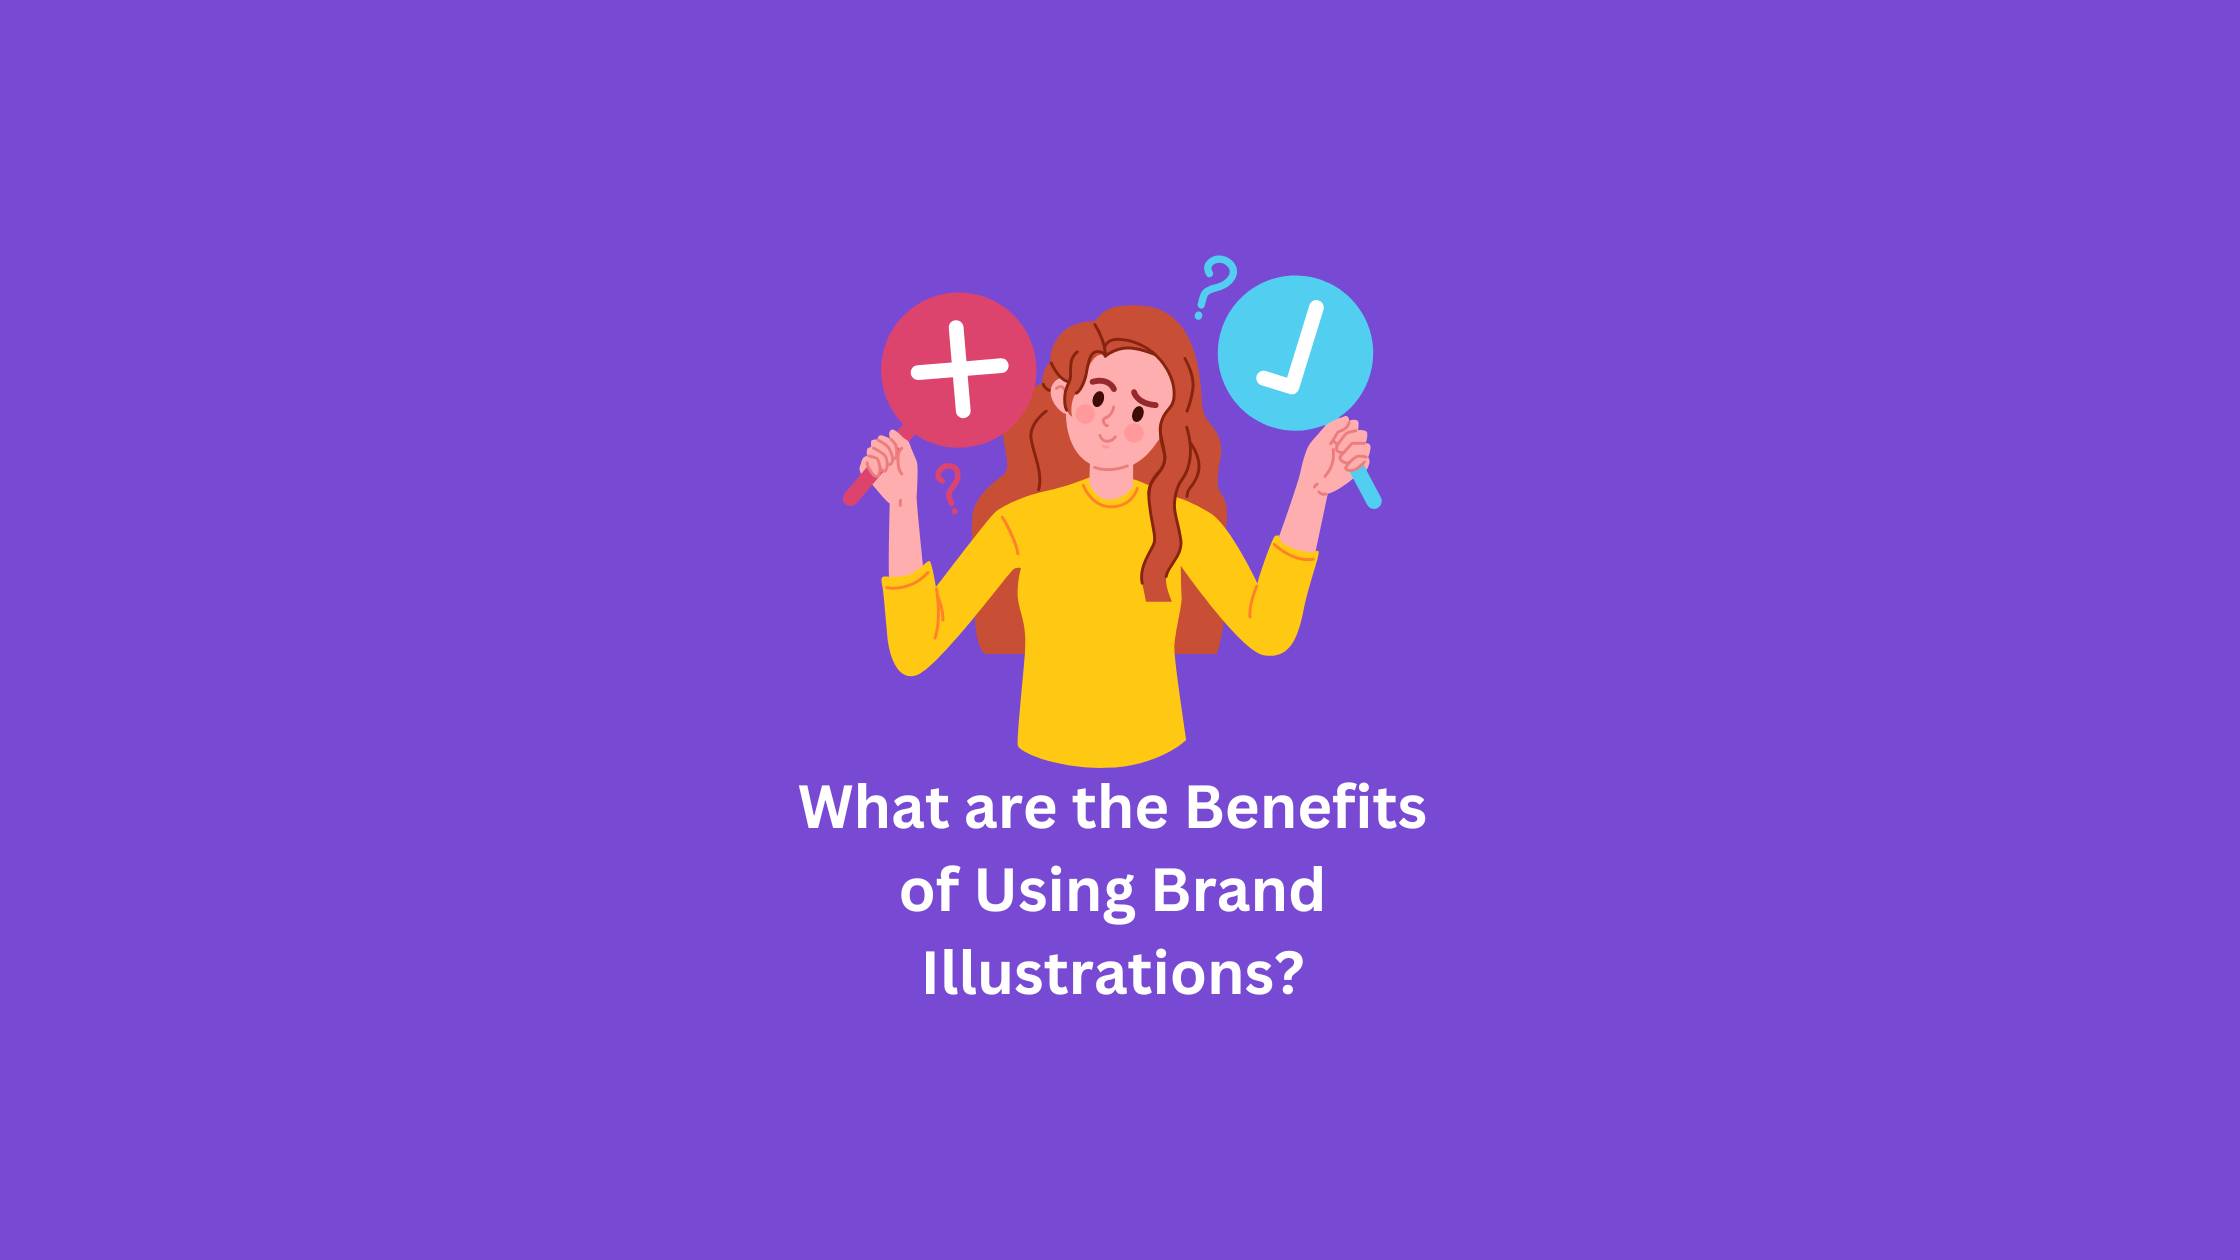 What are the Benefits of Using Brand Illustrations?